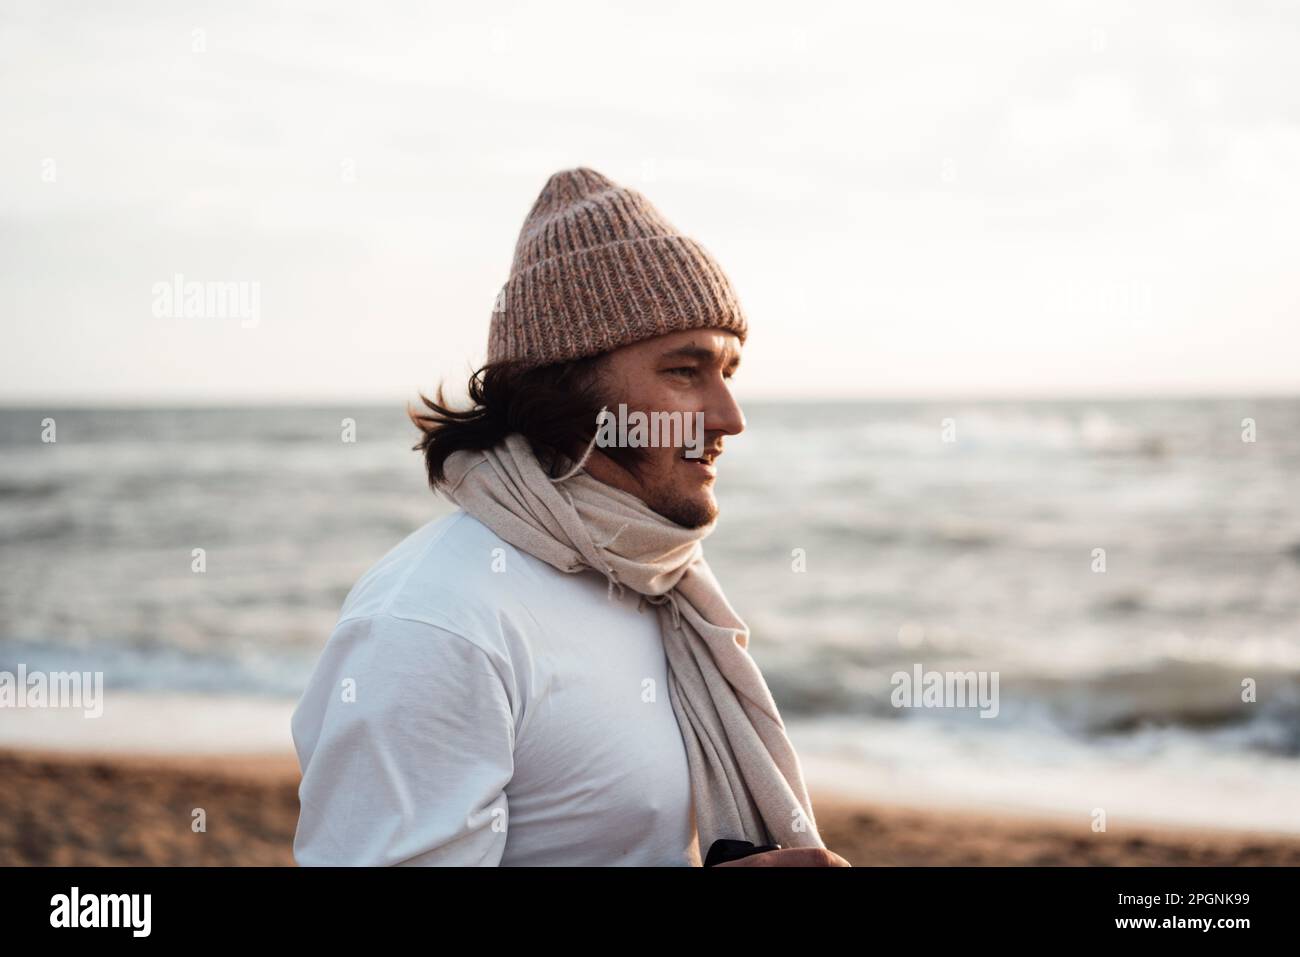 Man wearing knit hat standing in front of sea at beach Stock Photo